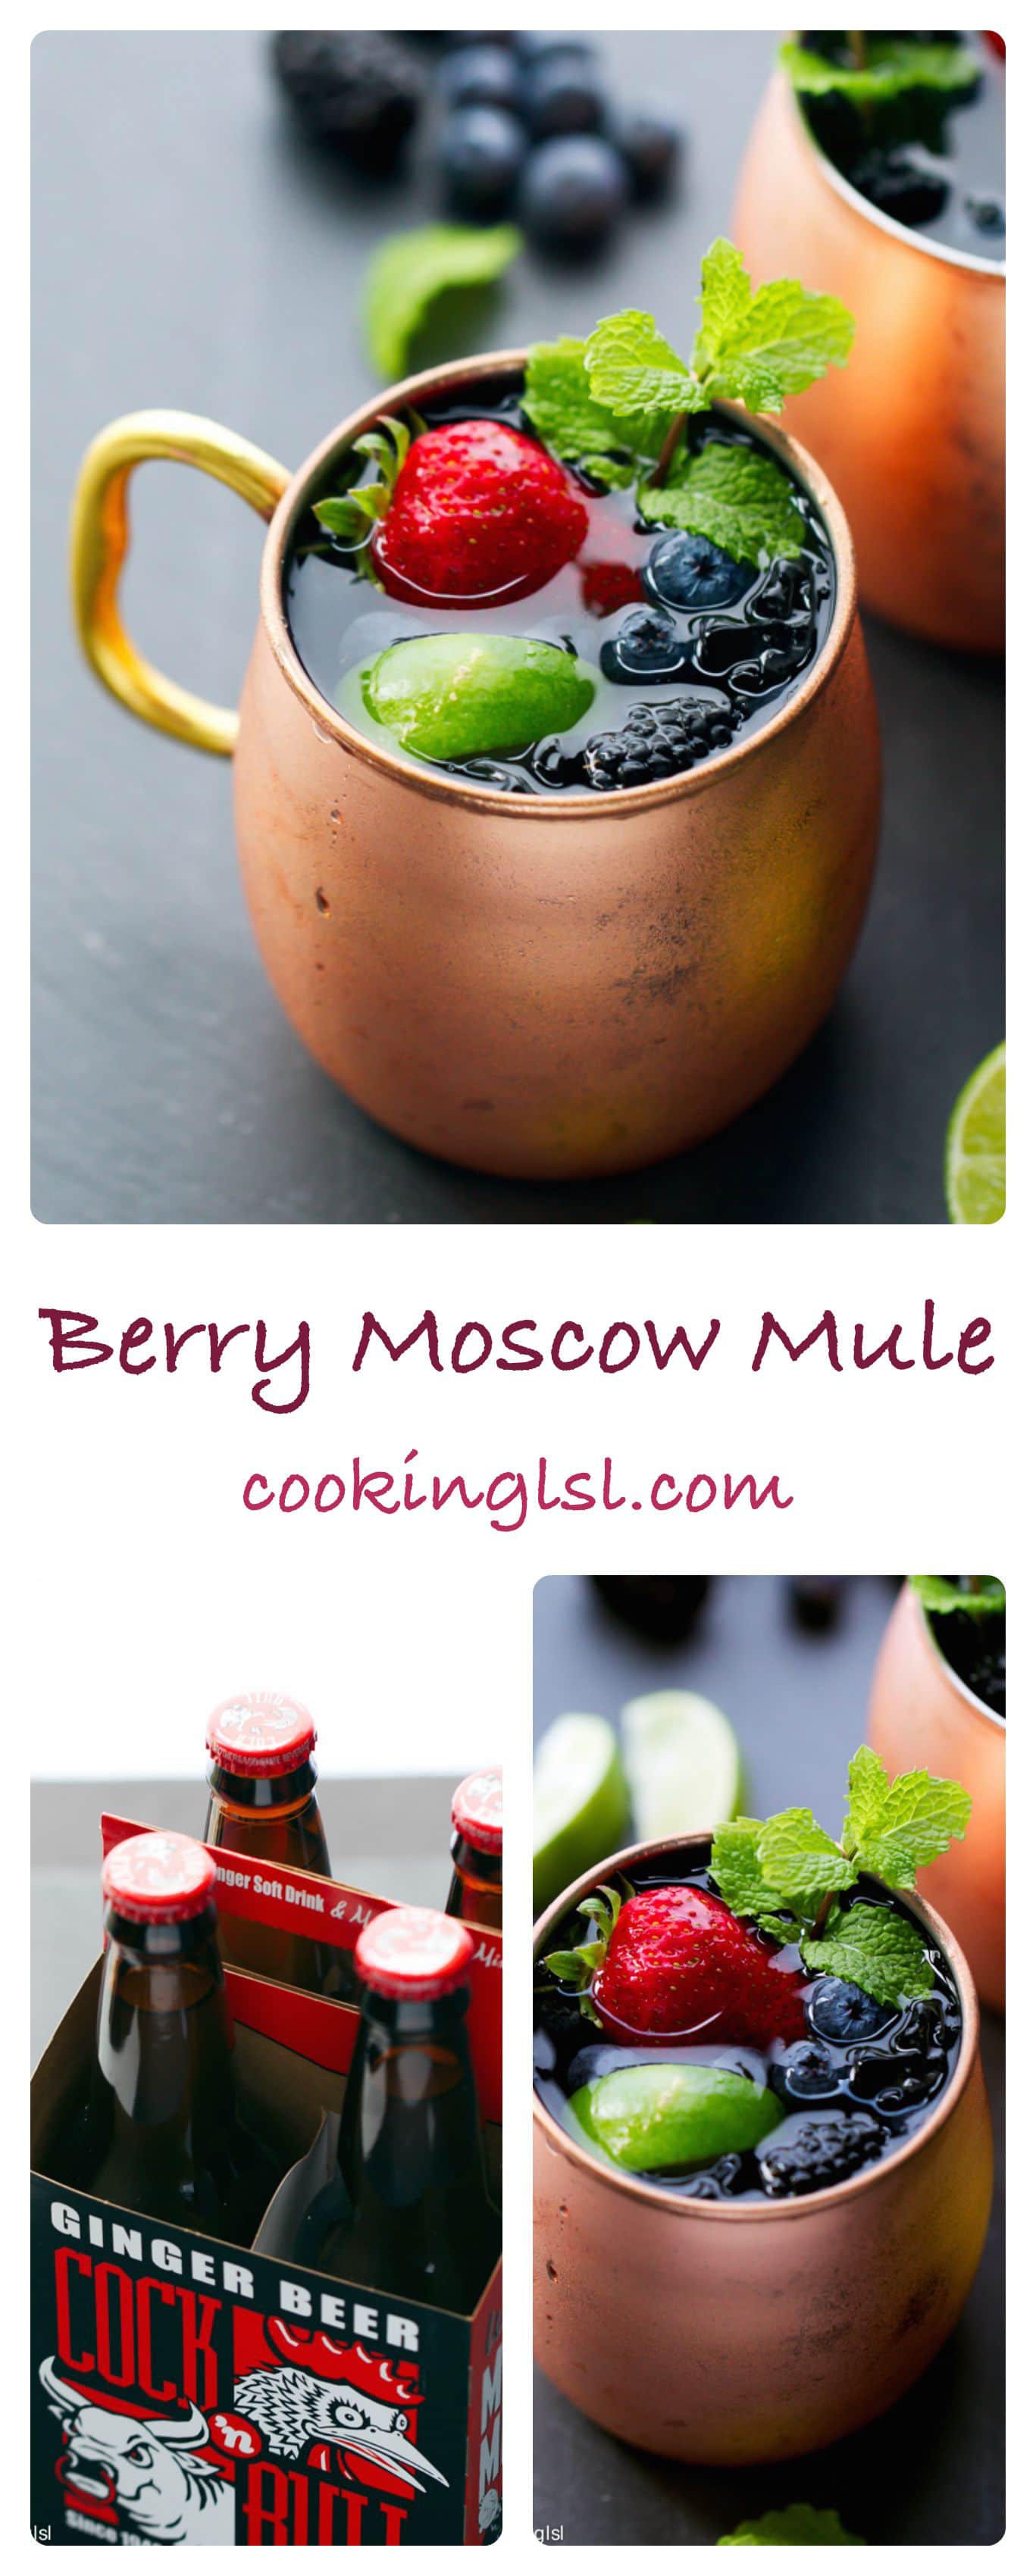 berry-Moscow-Mule-cocktail-recipe